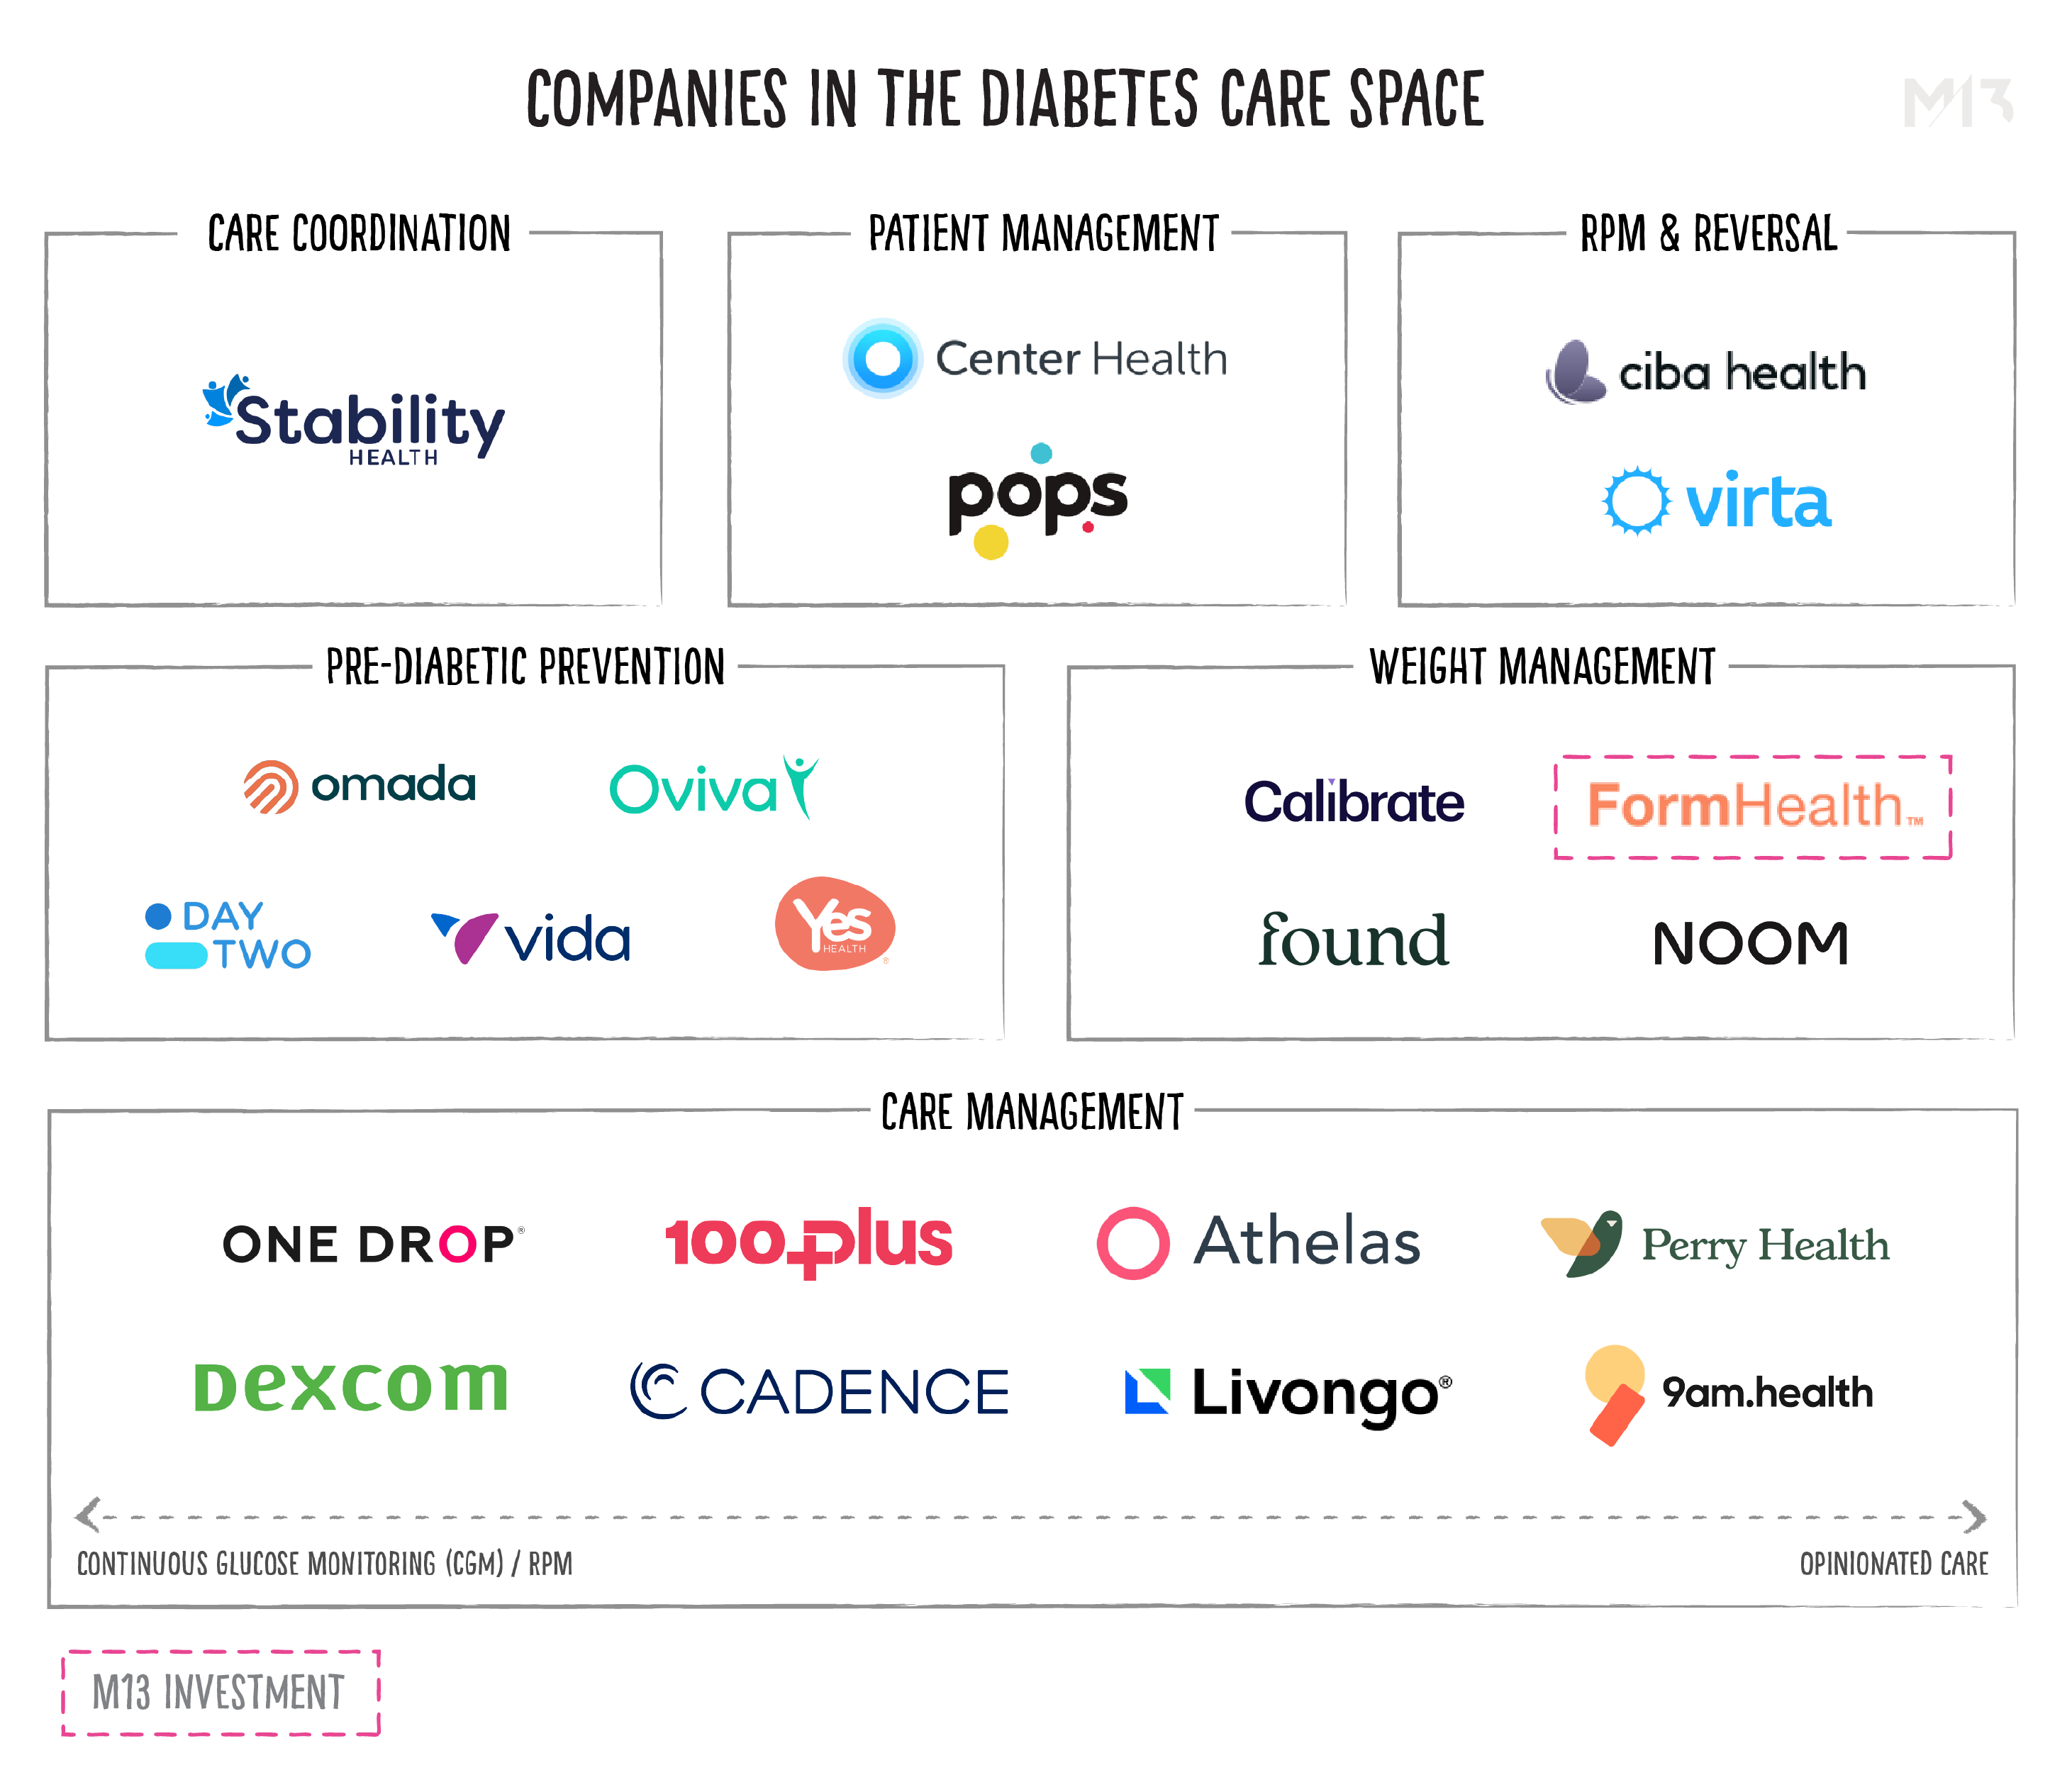 Specialty Care - Diabetes companies chart